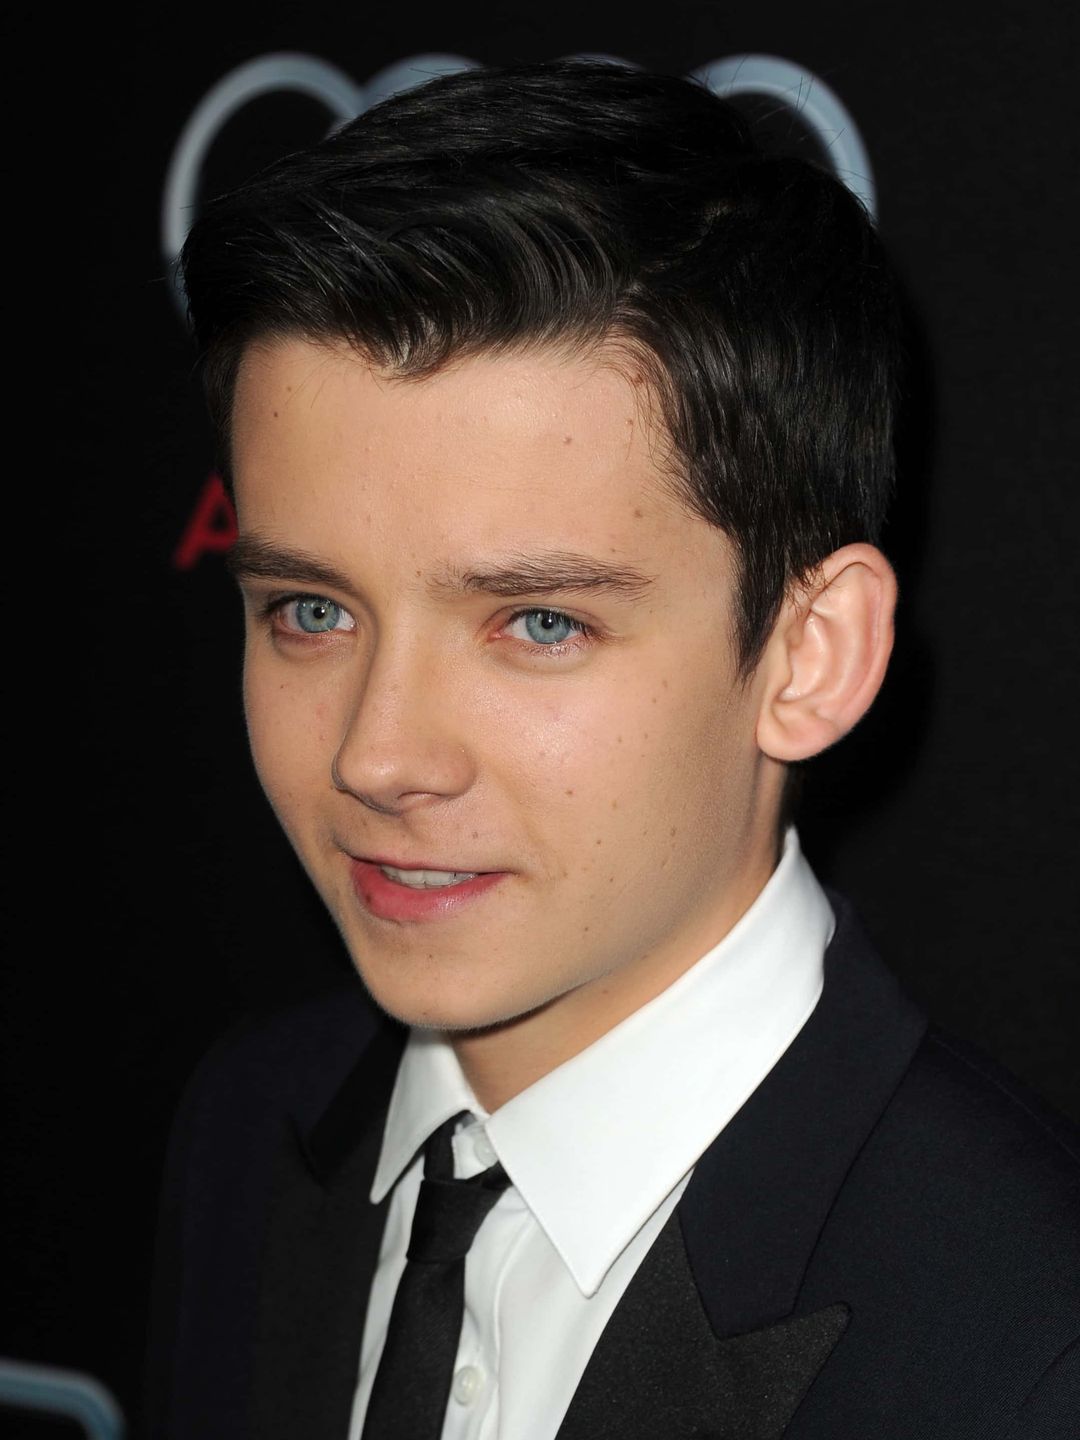 Asa Butterfield young age